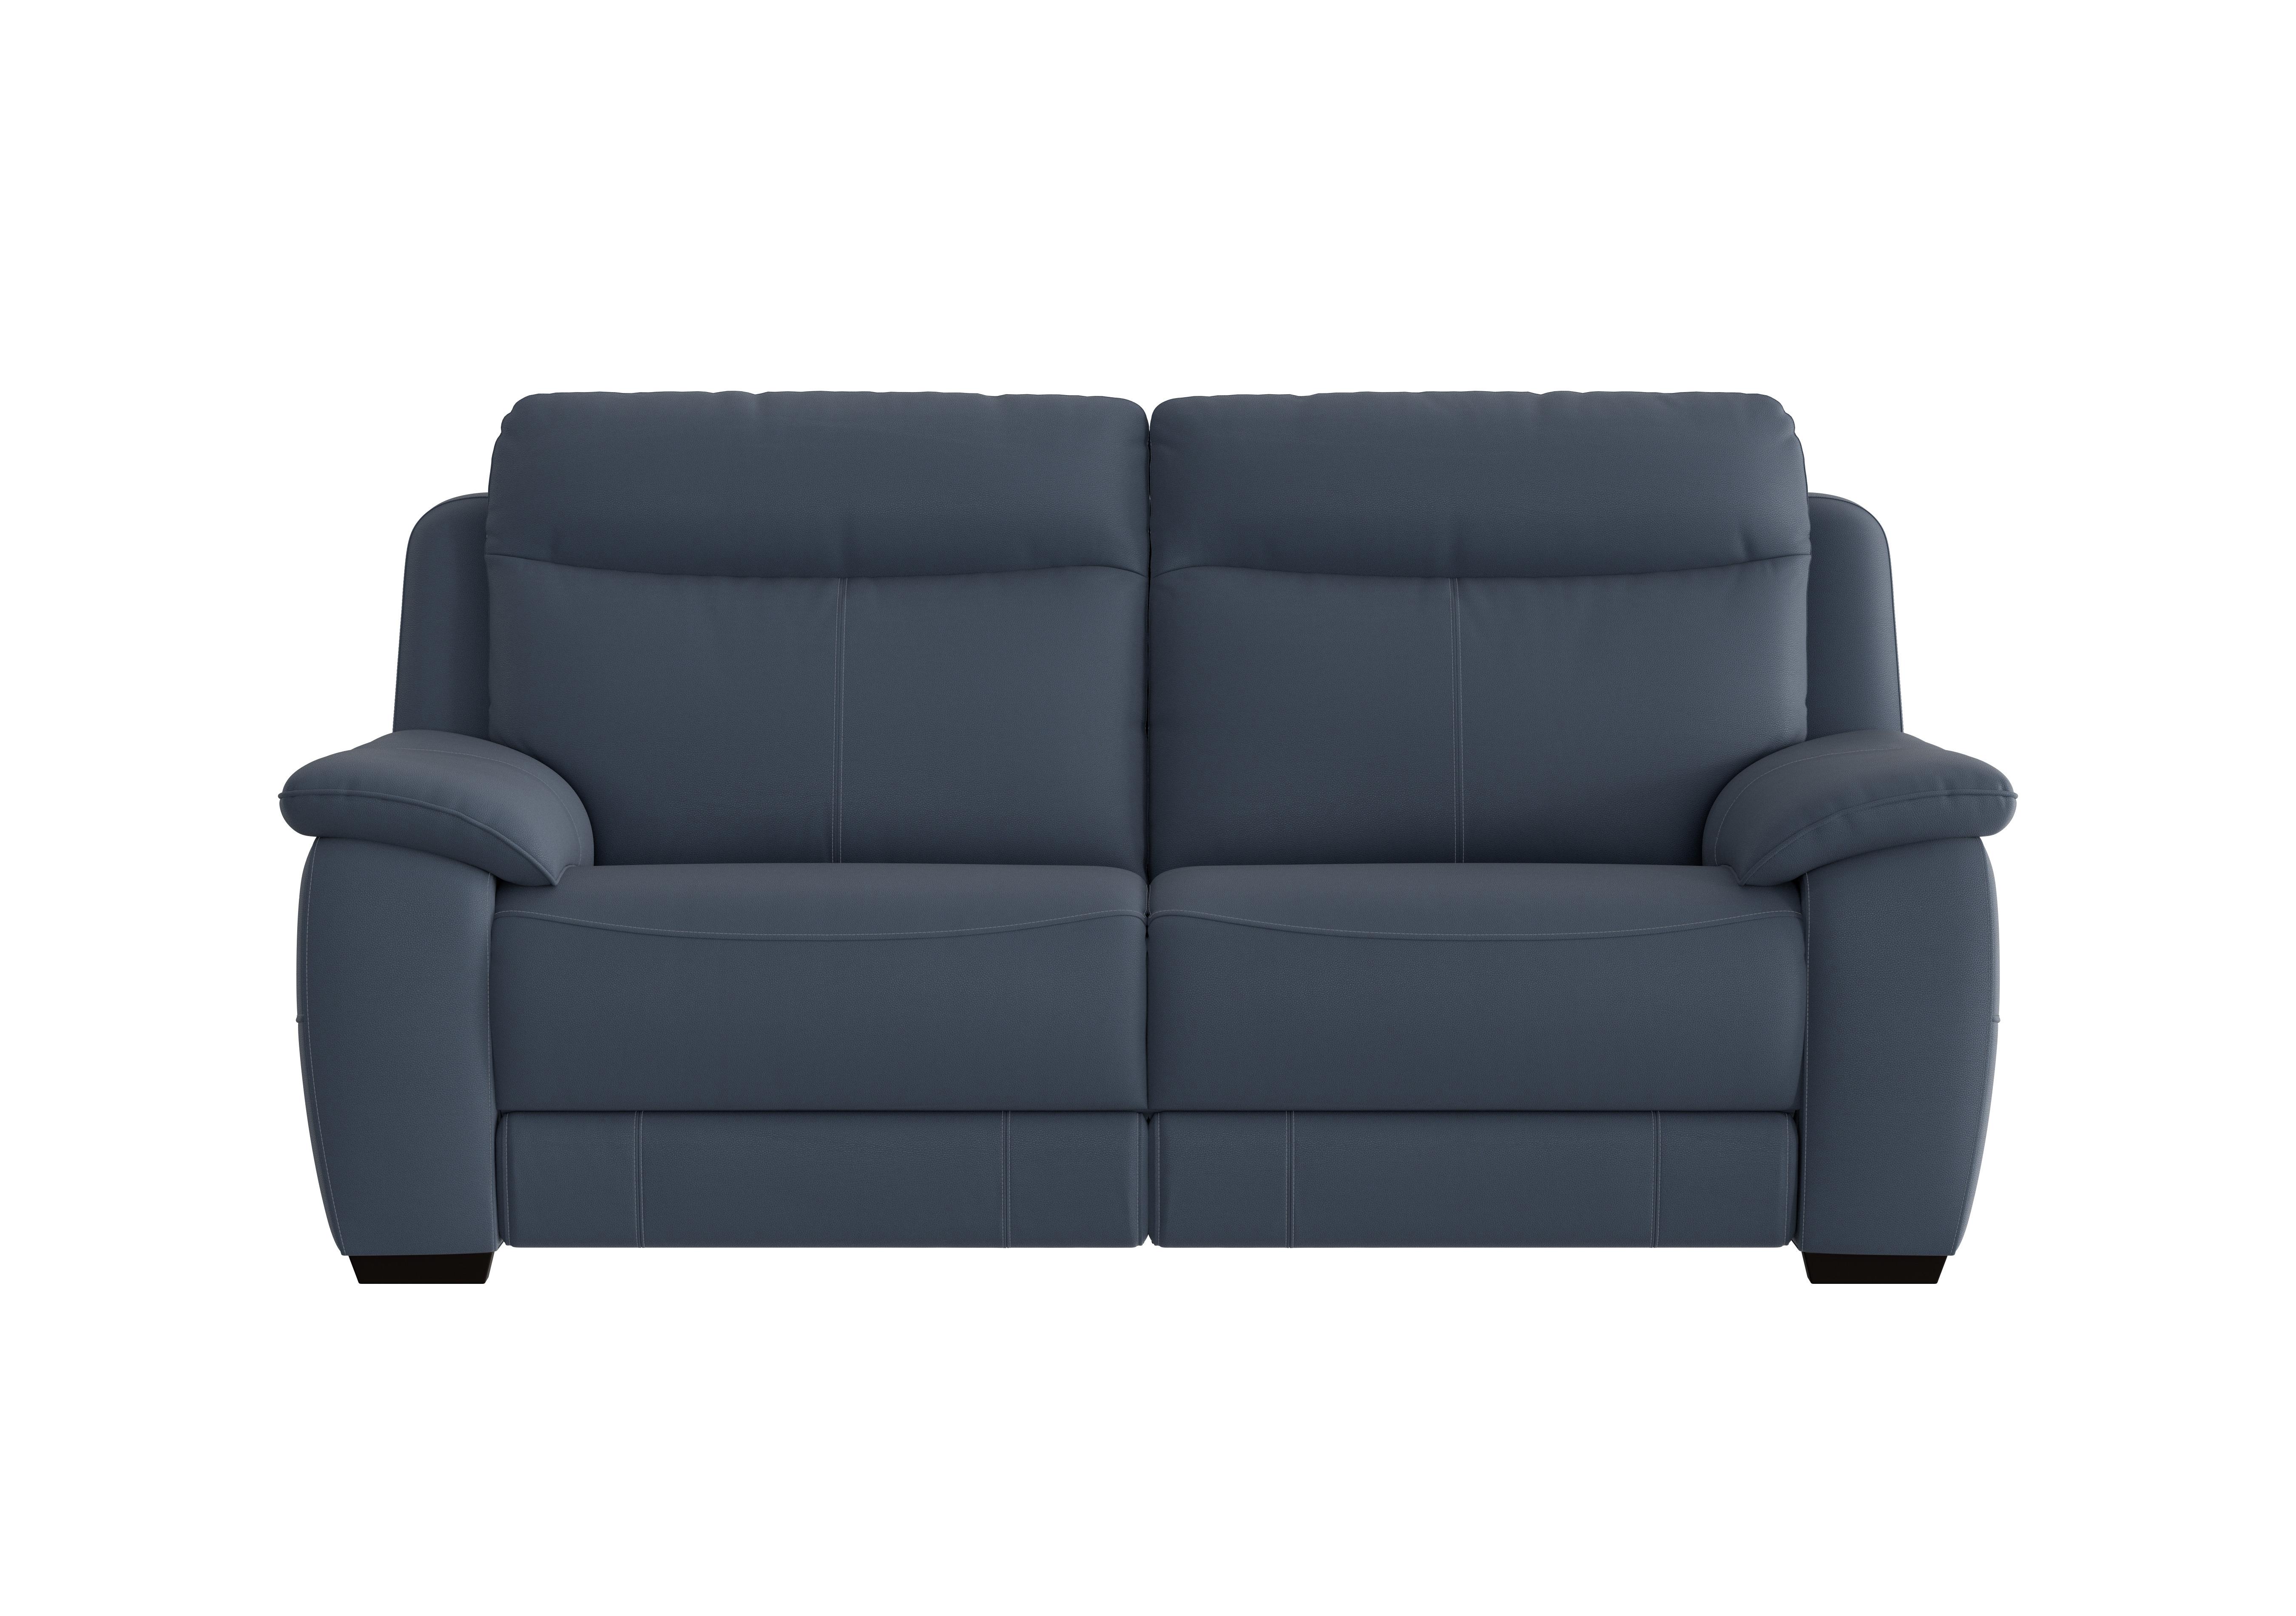 Starlight Express 3 Seater Leather Sofa in Bv-313e Ocean Blue on Furniture Village